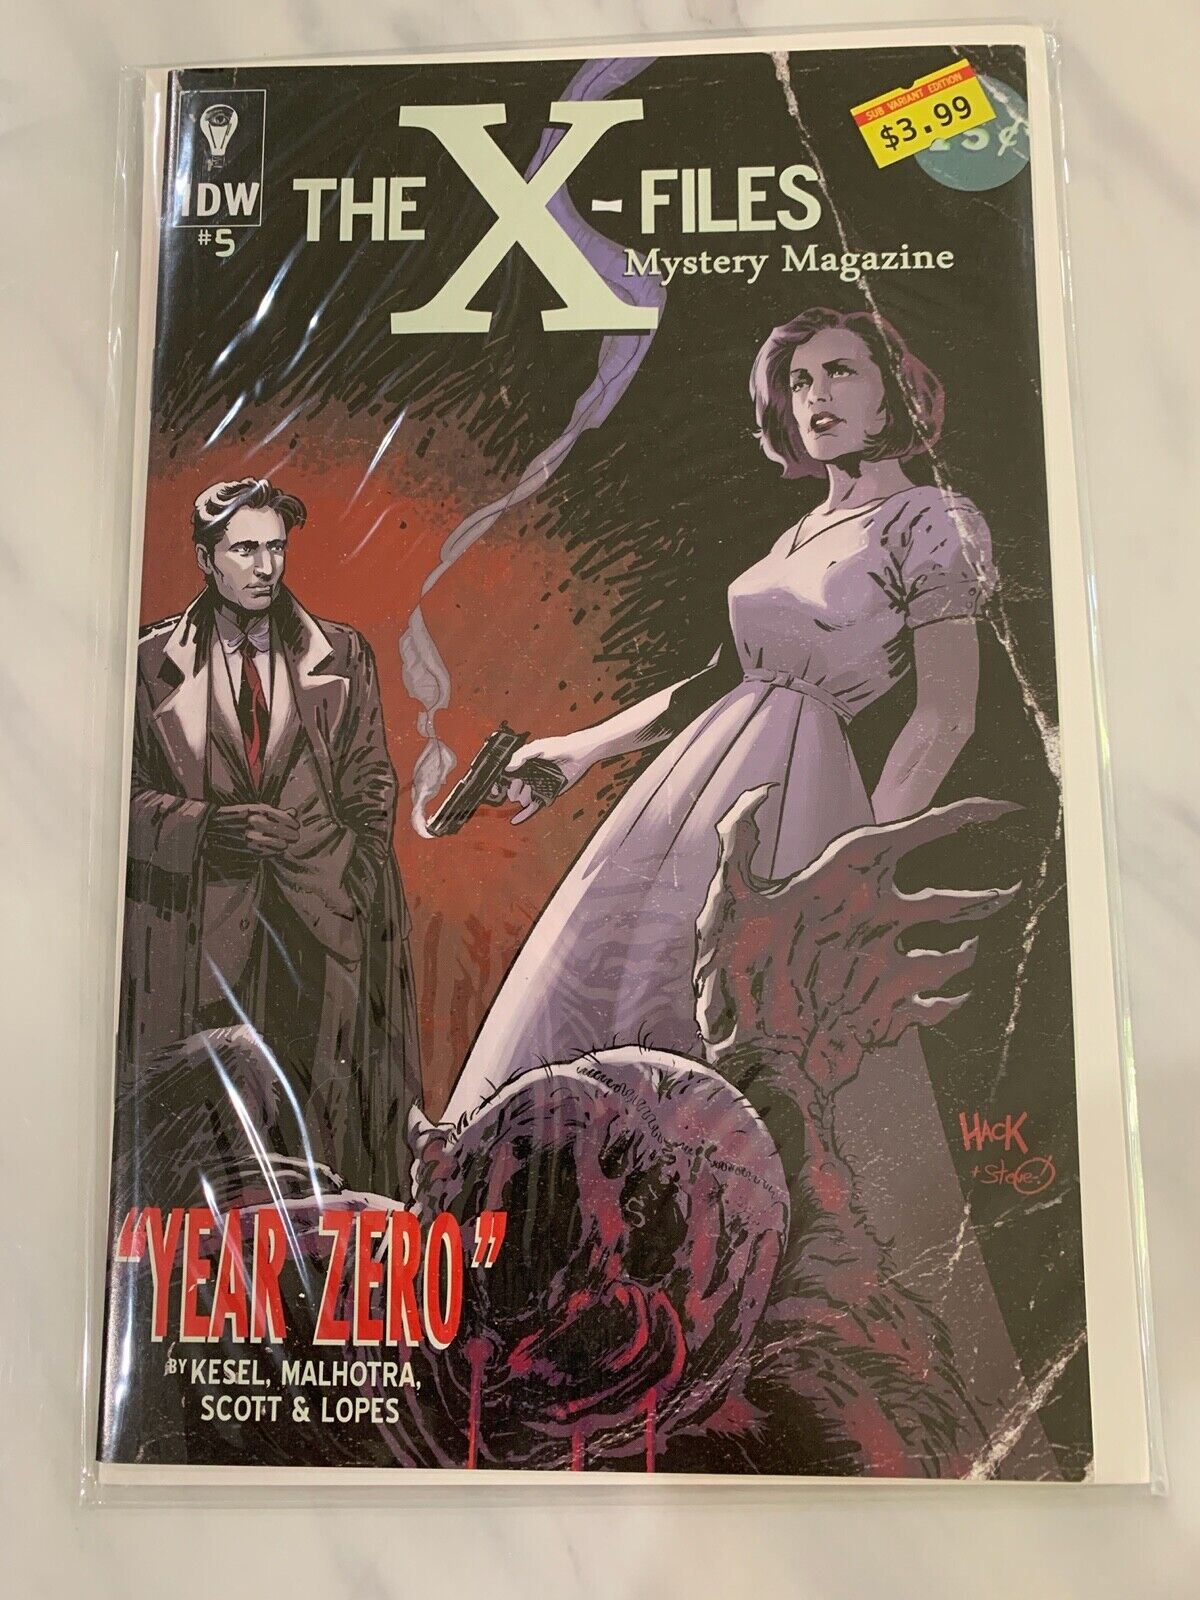 The X-Files: Year Zero #5 (Cover Variant) 